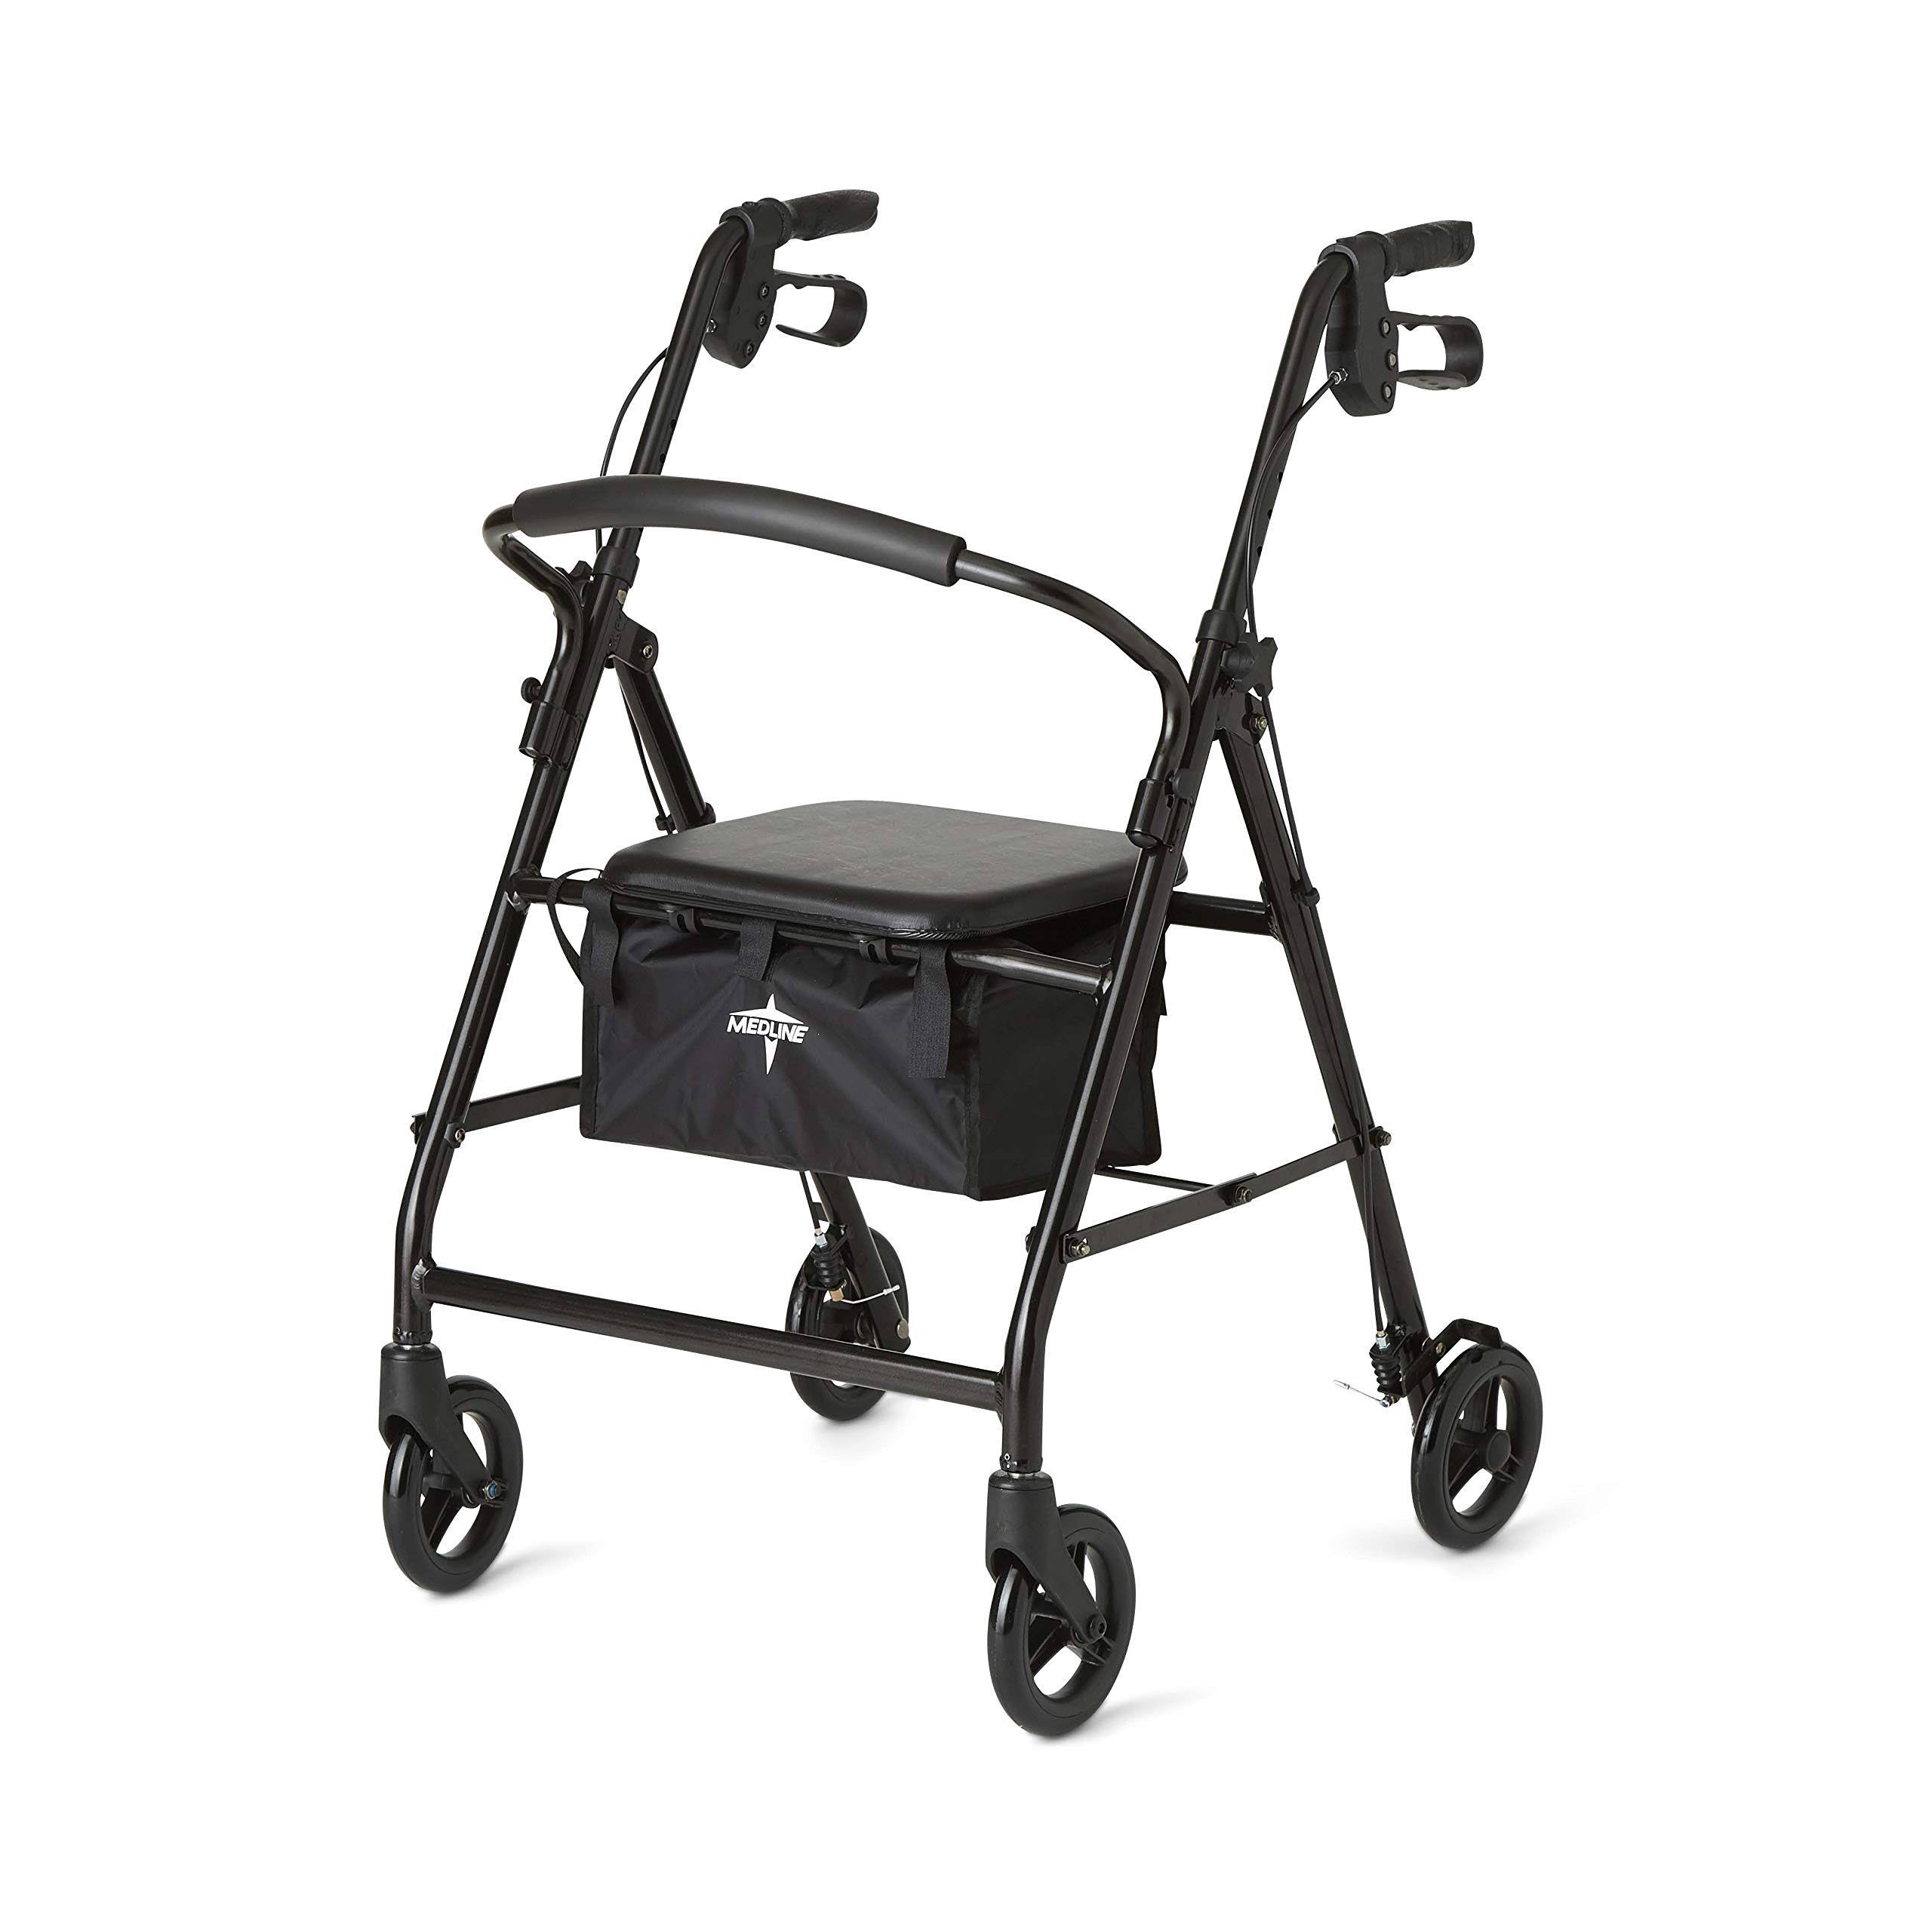 Medline Foldable Steel Rollator Walker With Seat & 6” Wheels – Stand Up, Rolling, For Injuries, Seniors, & Adults, Black